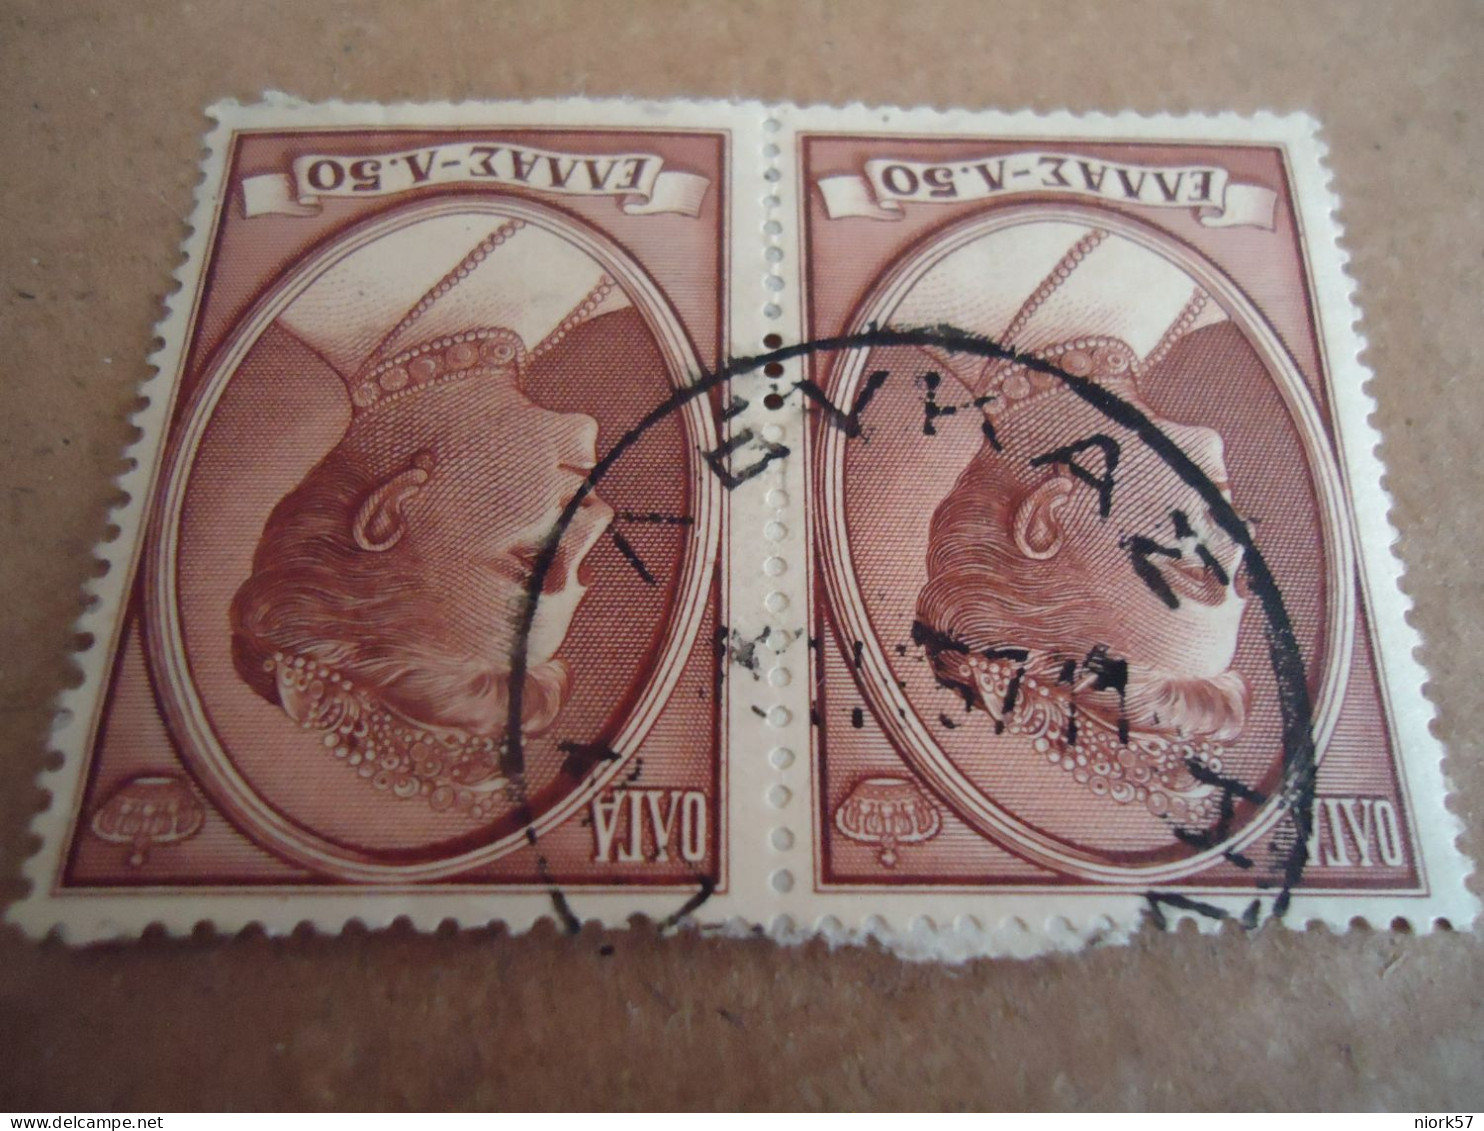 GREECE   POSTMARK ON STAMPS  ΛΕΥΚΑΣ 1957 - Affrancature Meccaniche Rosse (EMA)